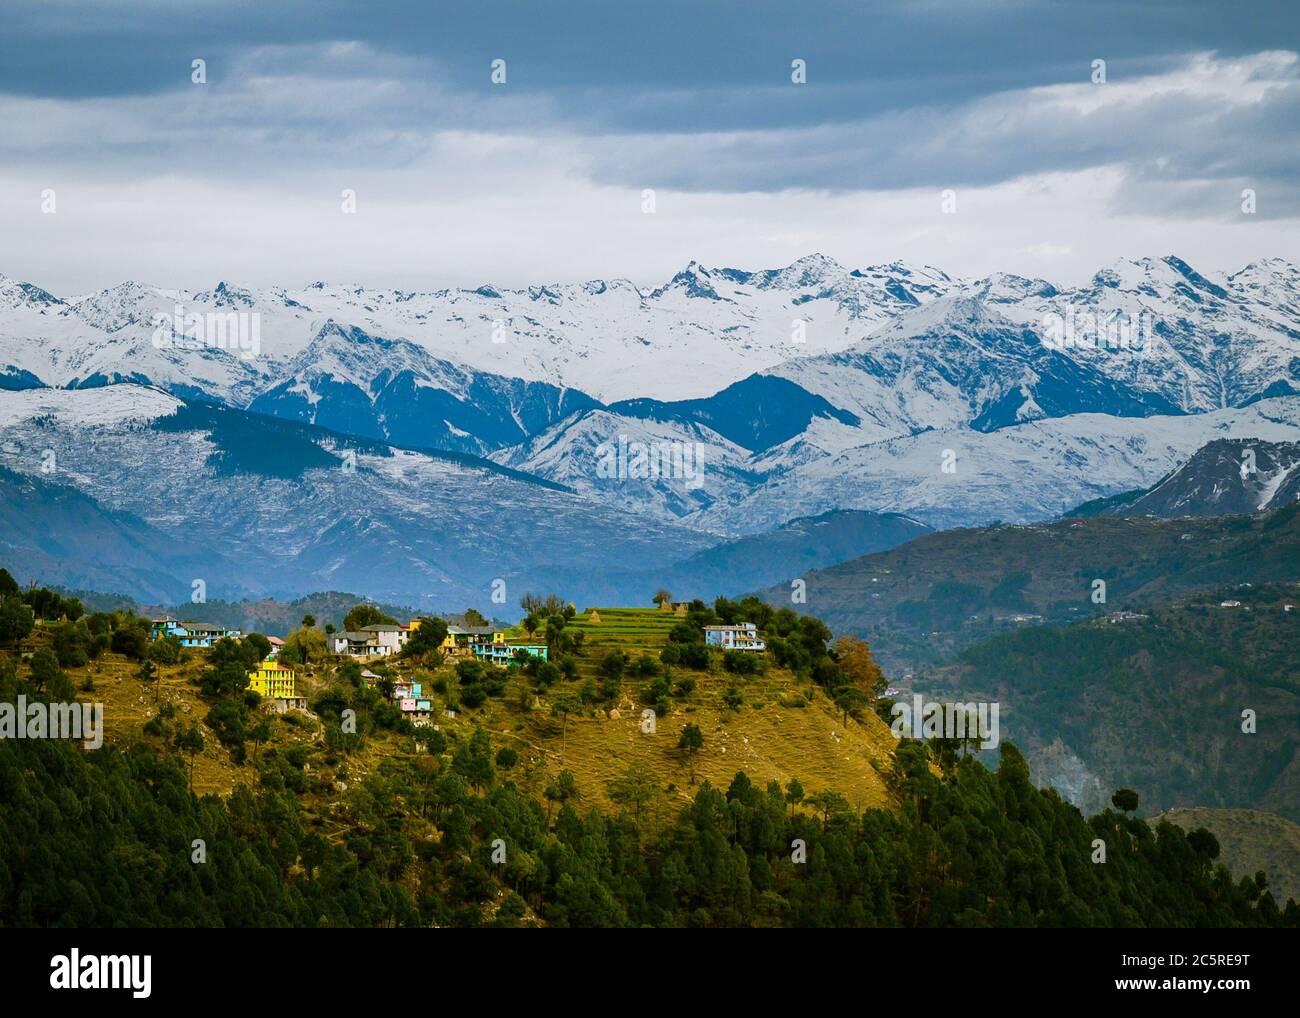 A scenic village in the backdrop of the snowcapped Himalayan mountains in winter. Himachal Pradesh, India. Stock Photo